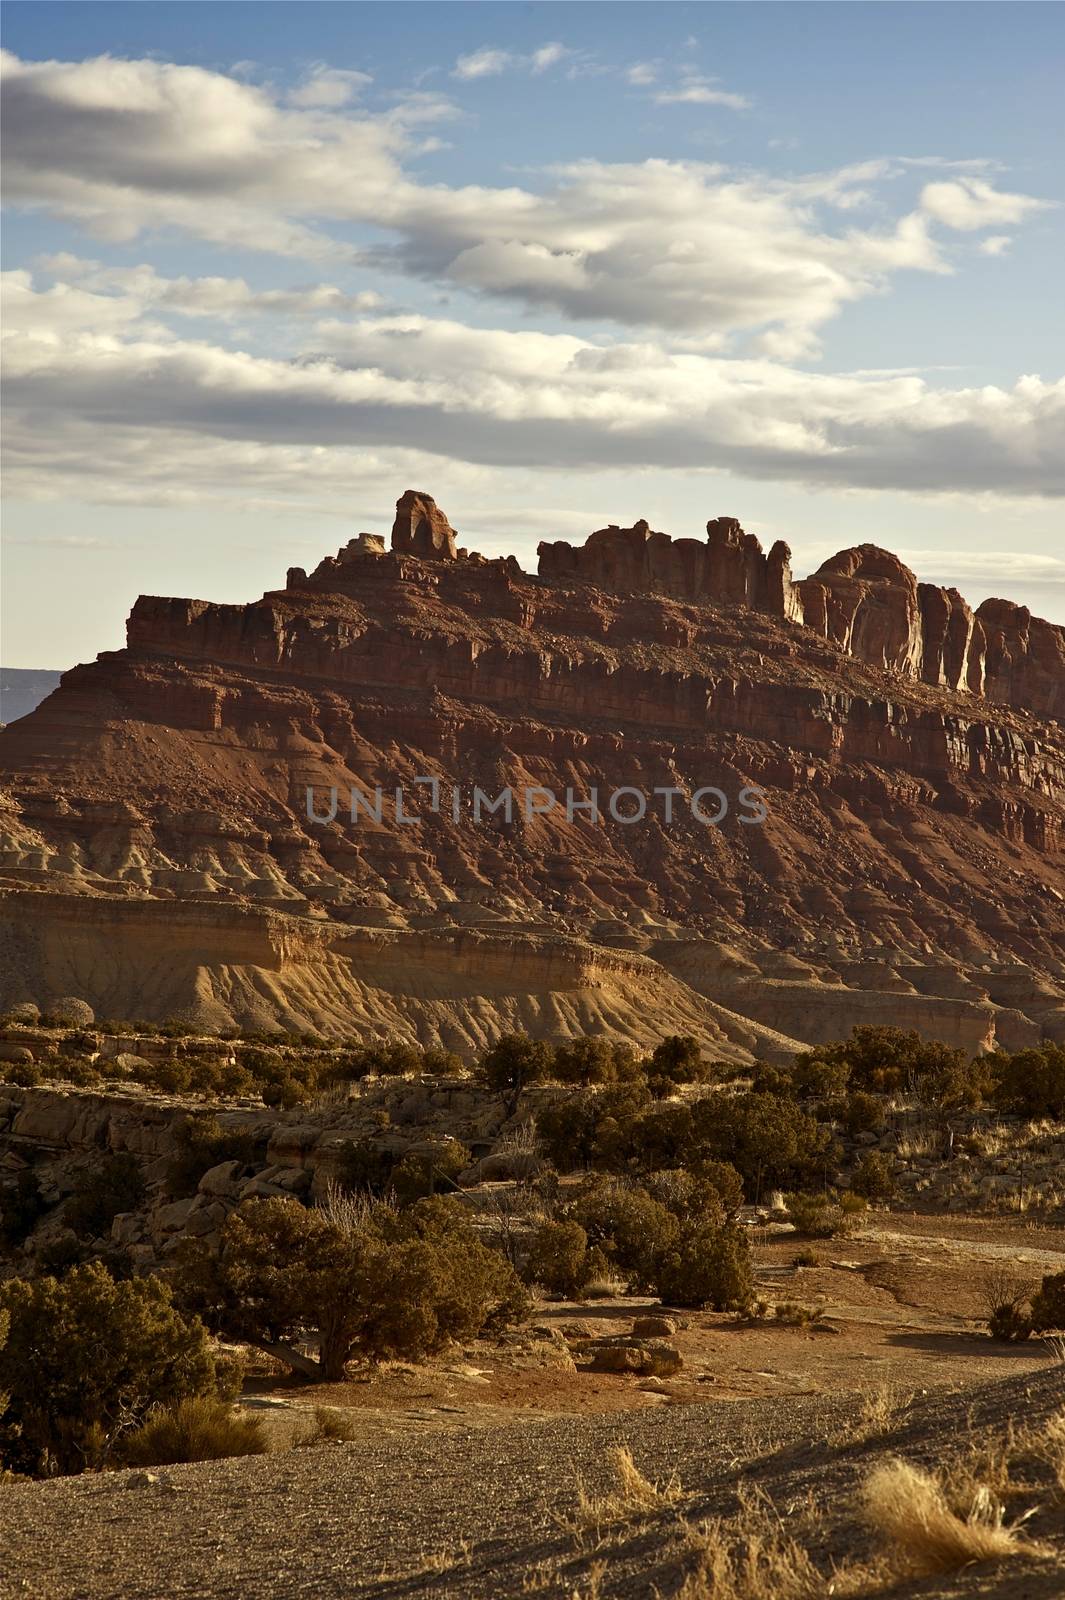 Utah State - Utah Rocky Landscape. Vertical Photo. Nature Photo Collection.